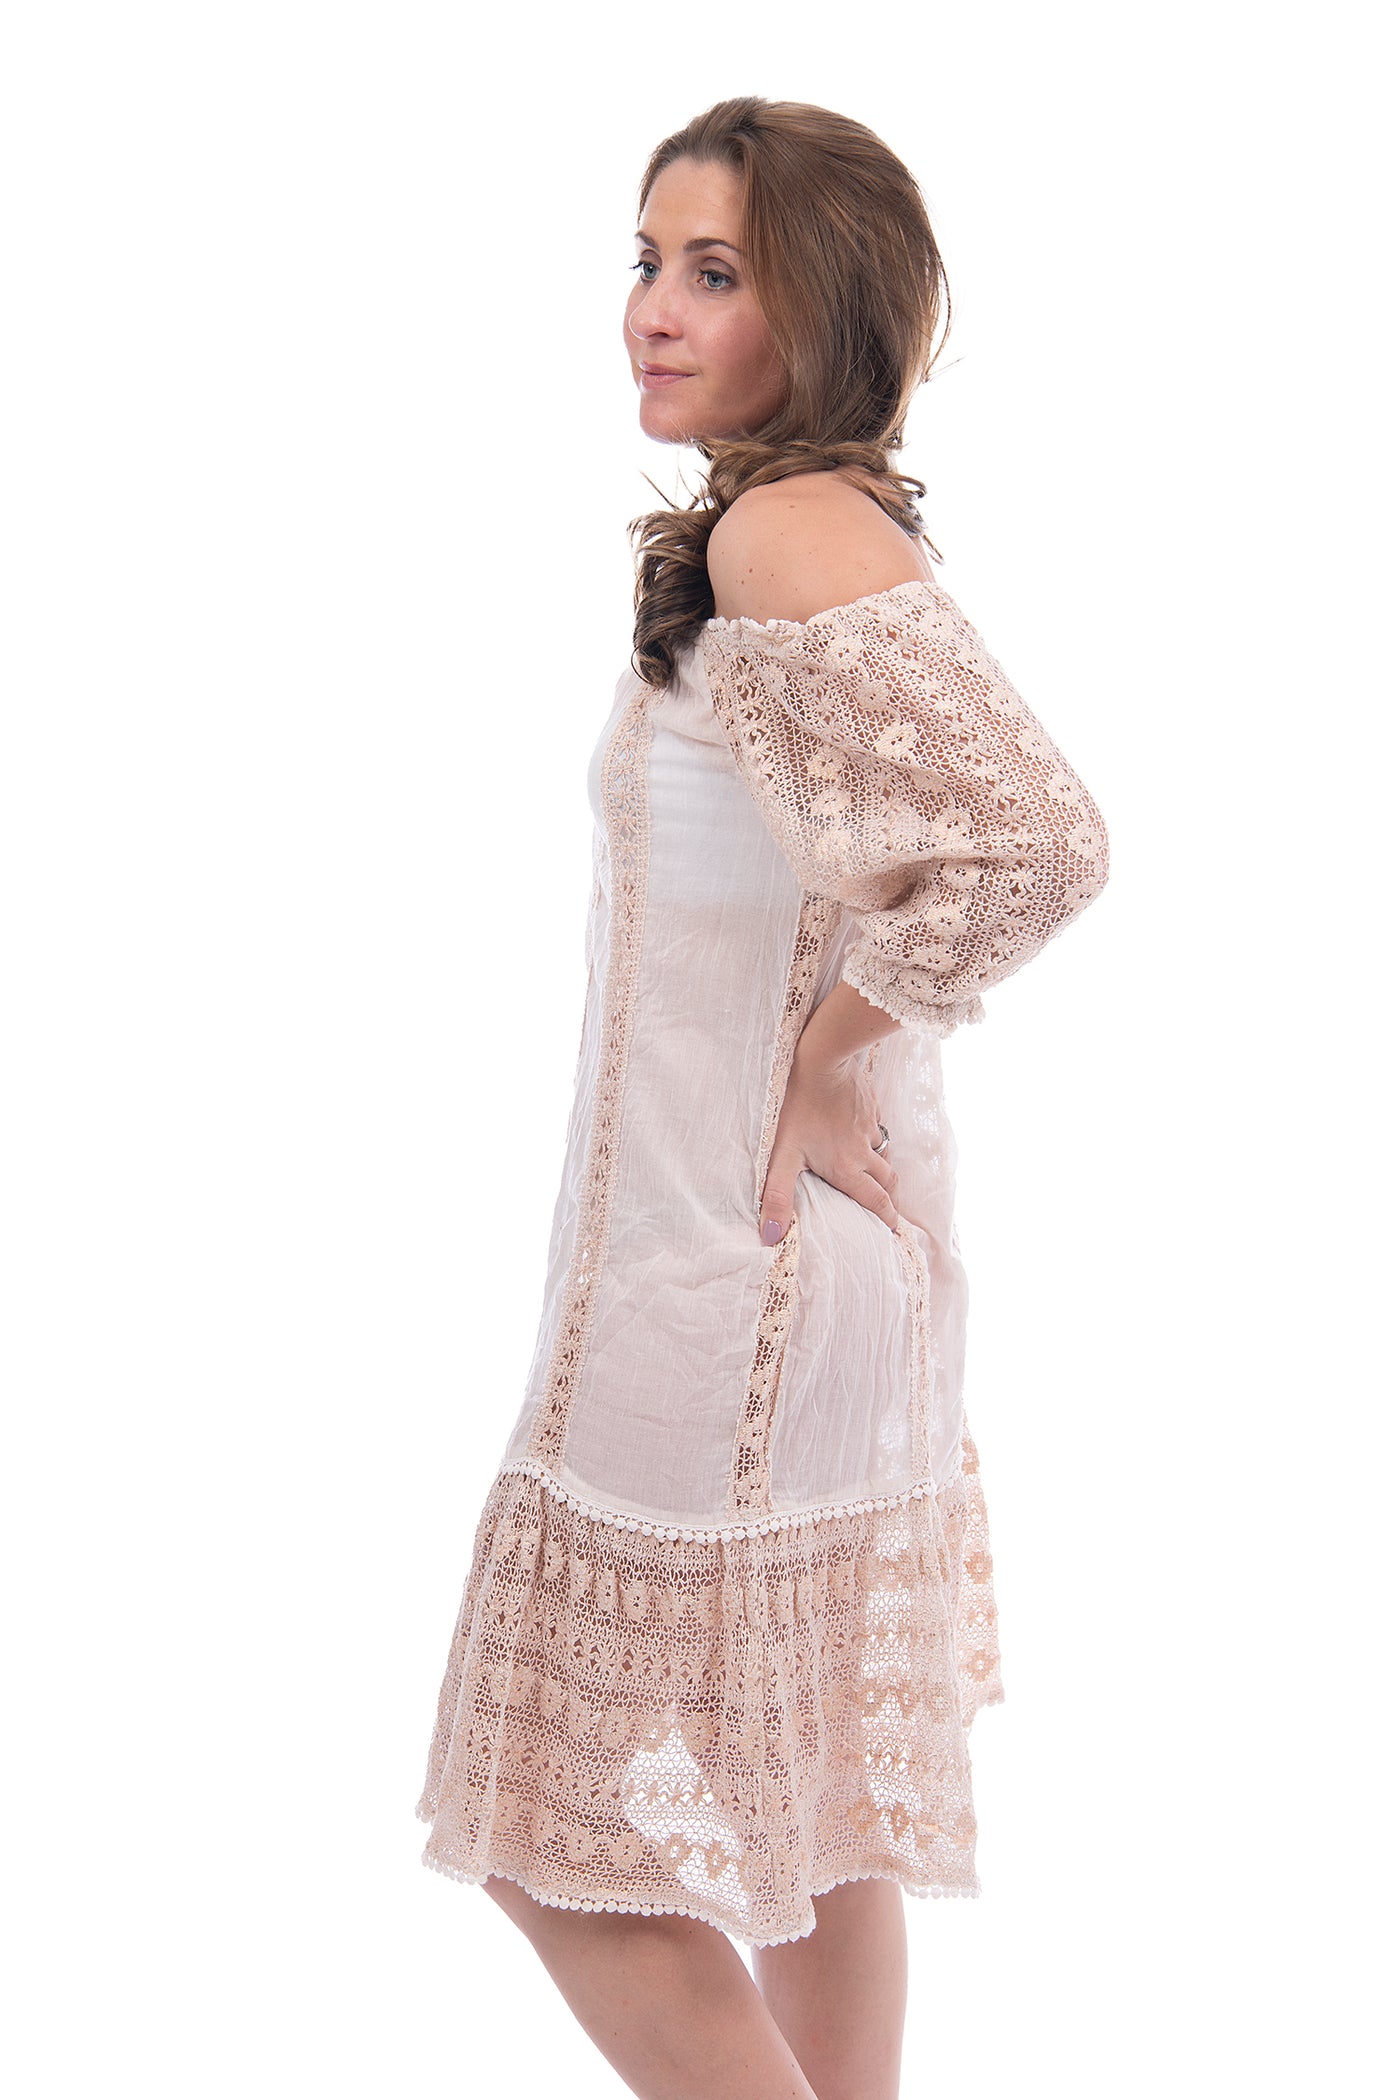 Baby pink and rose gold light cotton sundress with 3 quarter length sleeves